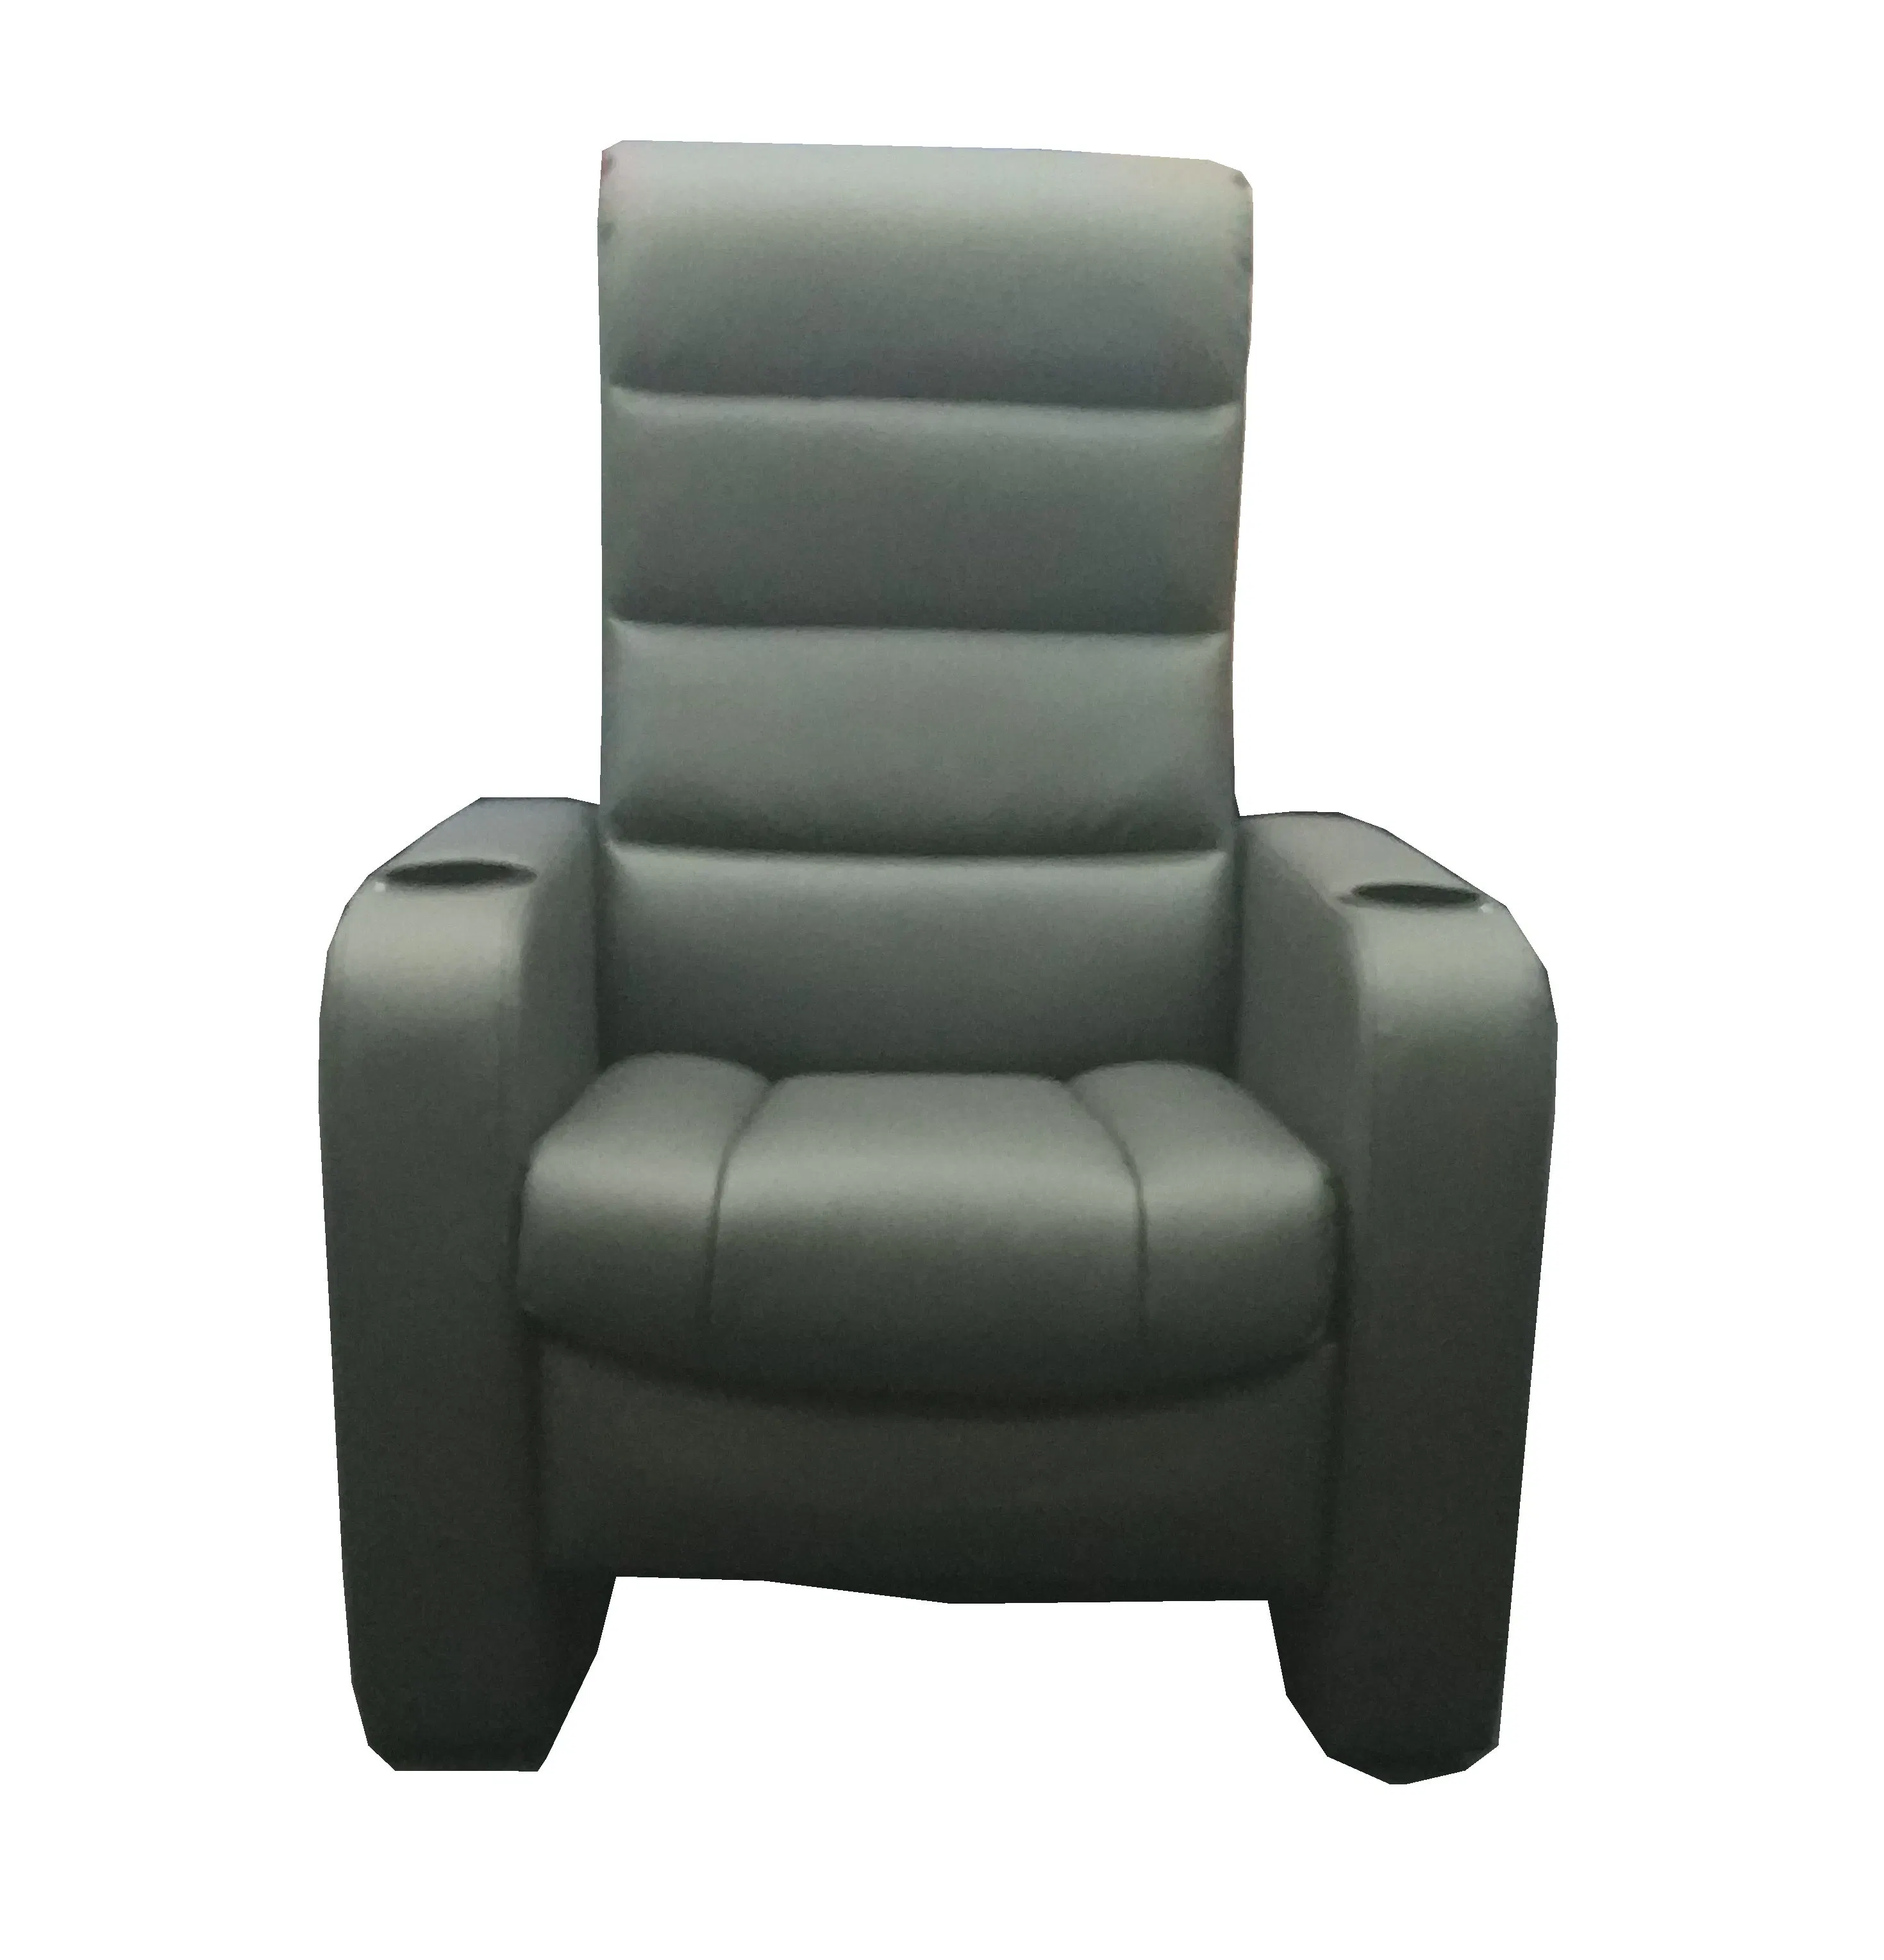 Push Back Cinema Hall Chair Auditorium Lecture Seating Price Theater Seat (TW09)